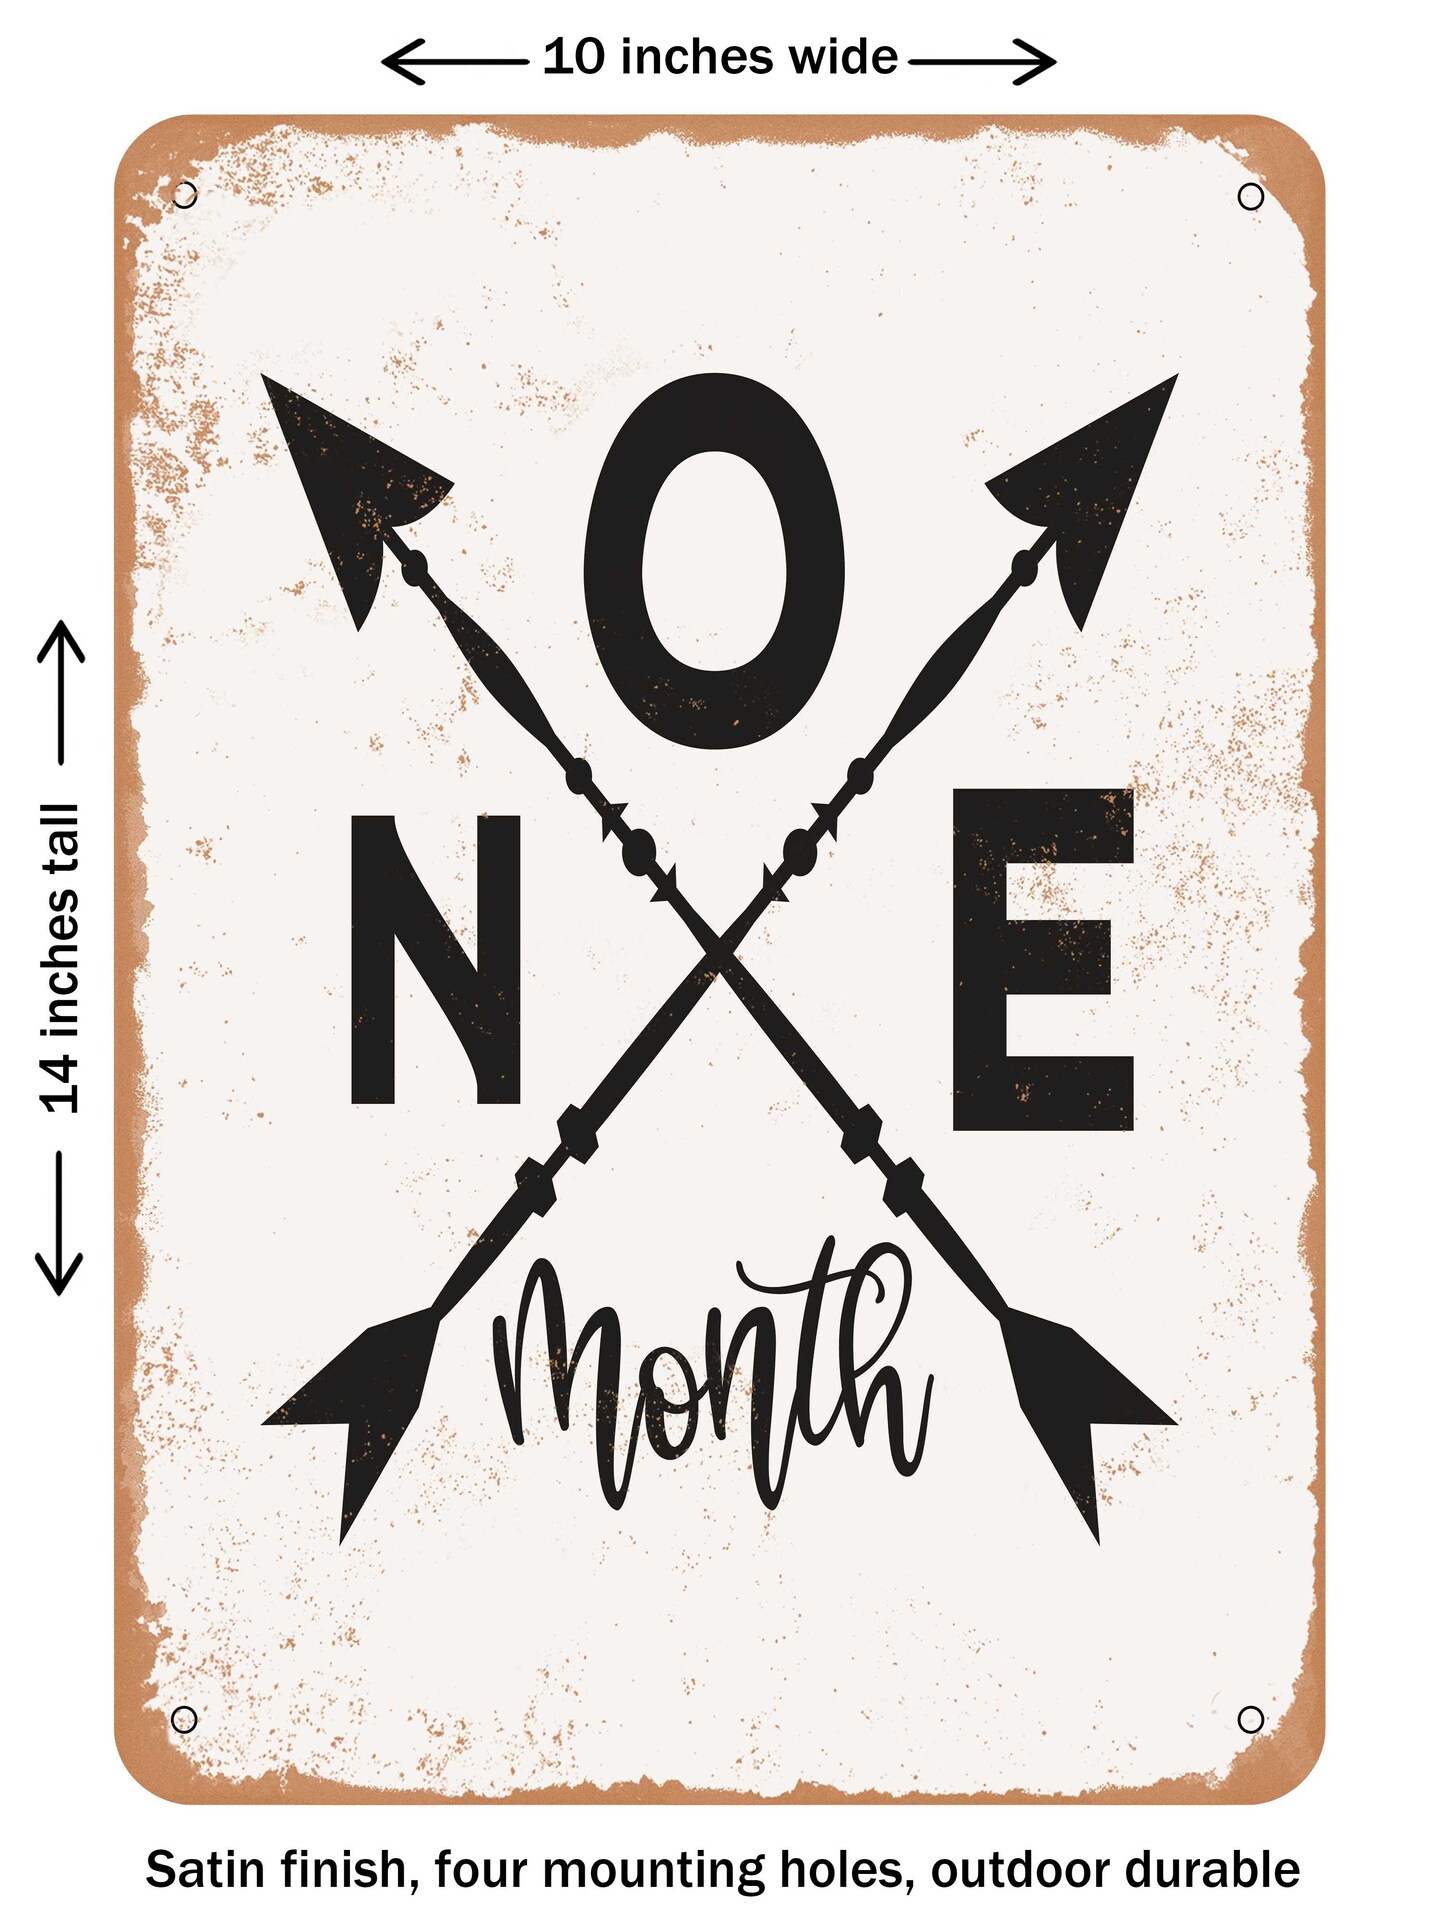 DECORATIVE METAL SIGN - One Month - 3  - Vintage Rusty Look